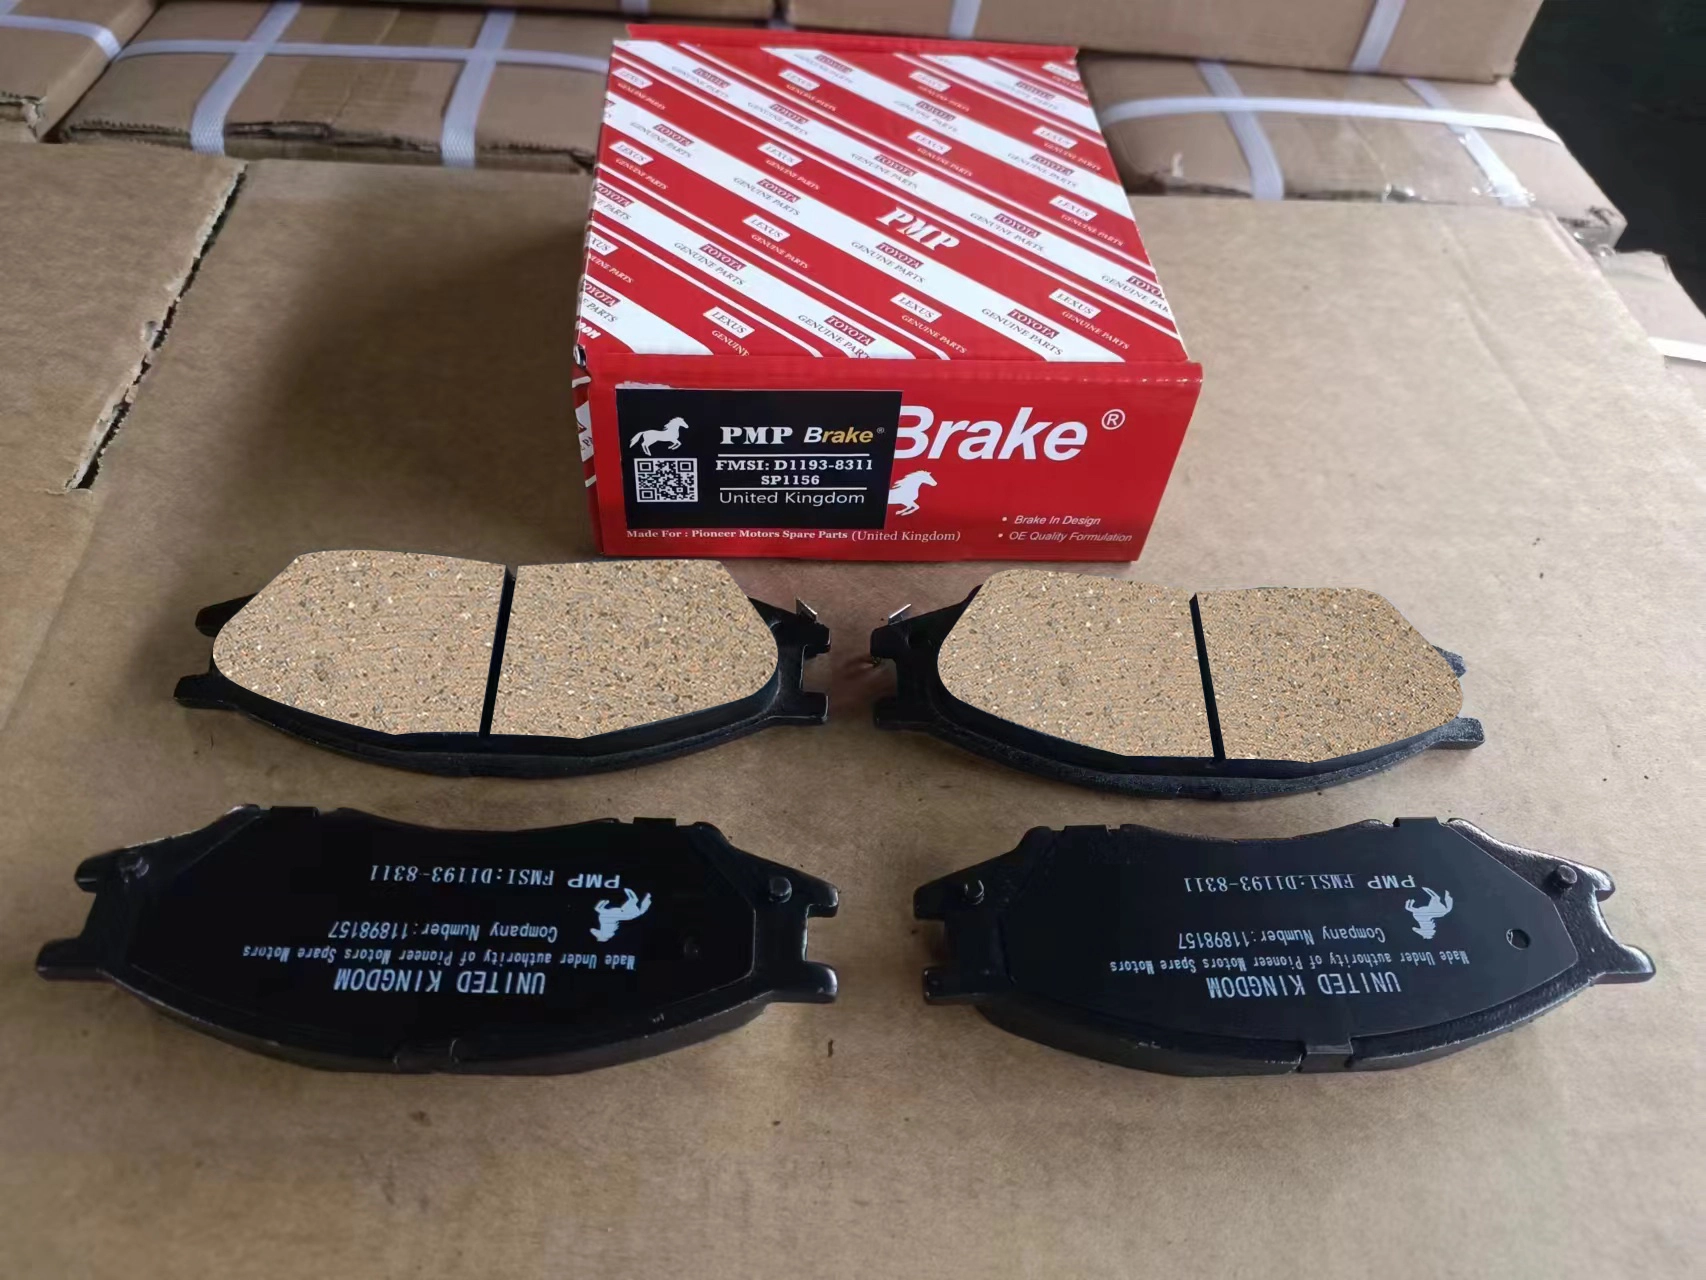 Brake pads for Toyota Corolla: high-performance ceramic pads for improved braking efficiency.